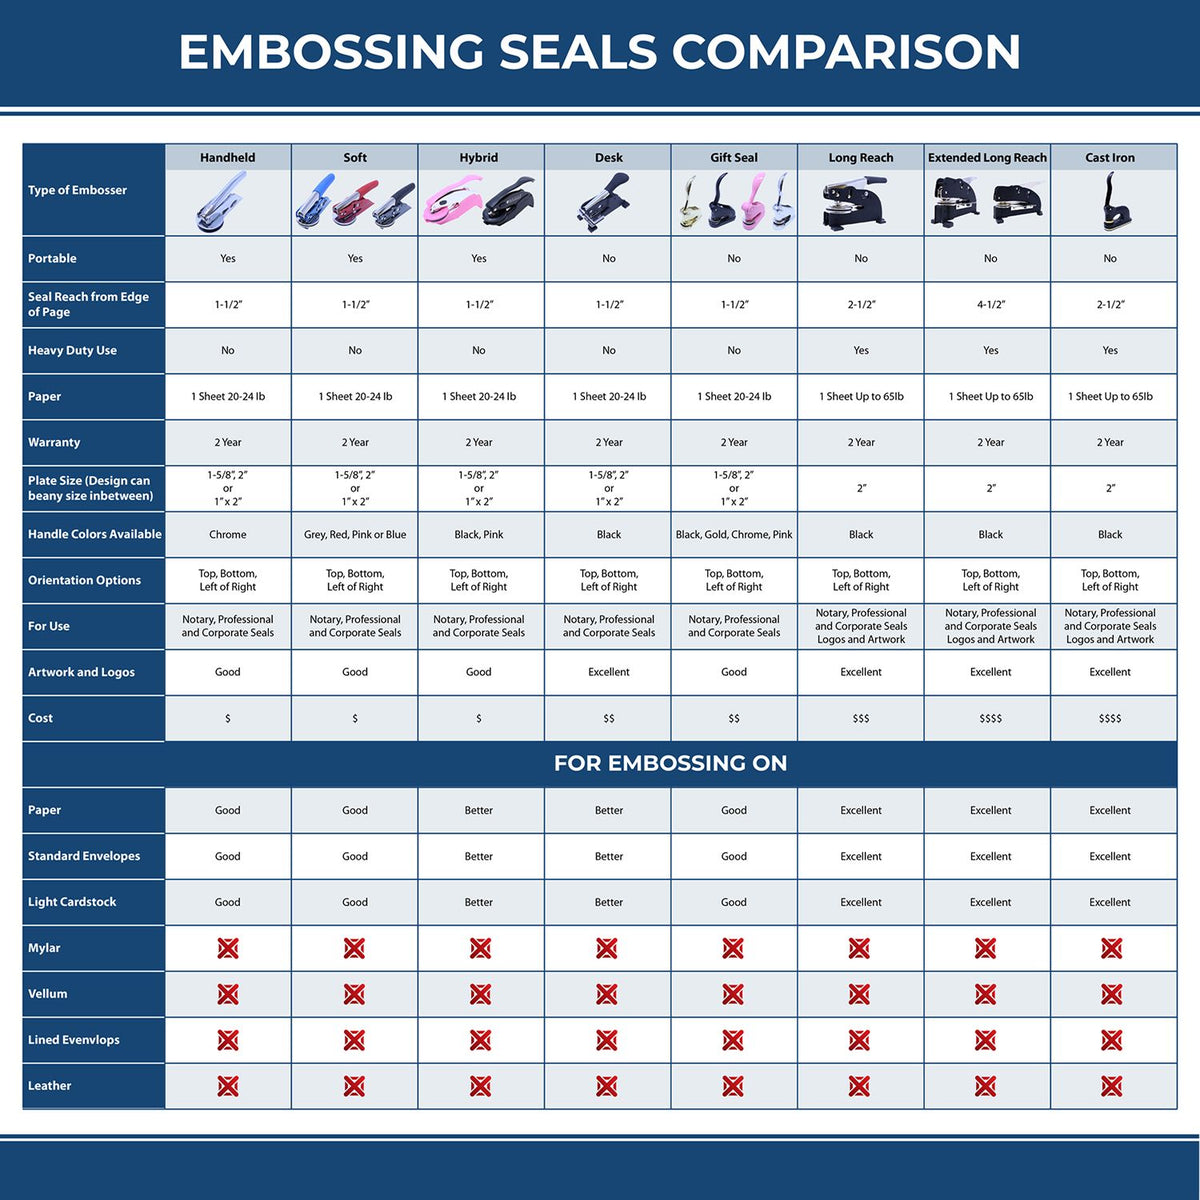 A comparison chart for the different types of mount models available for the Handheld Nebraska Professional Engineer Embosser.